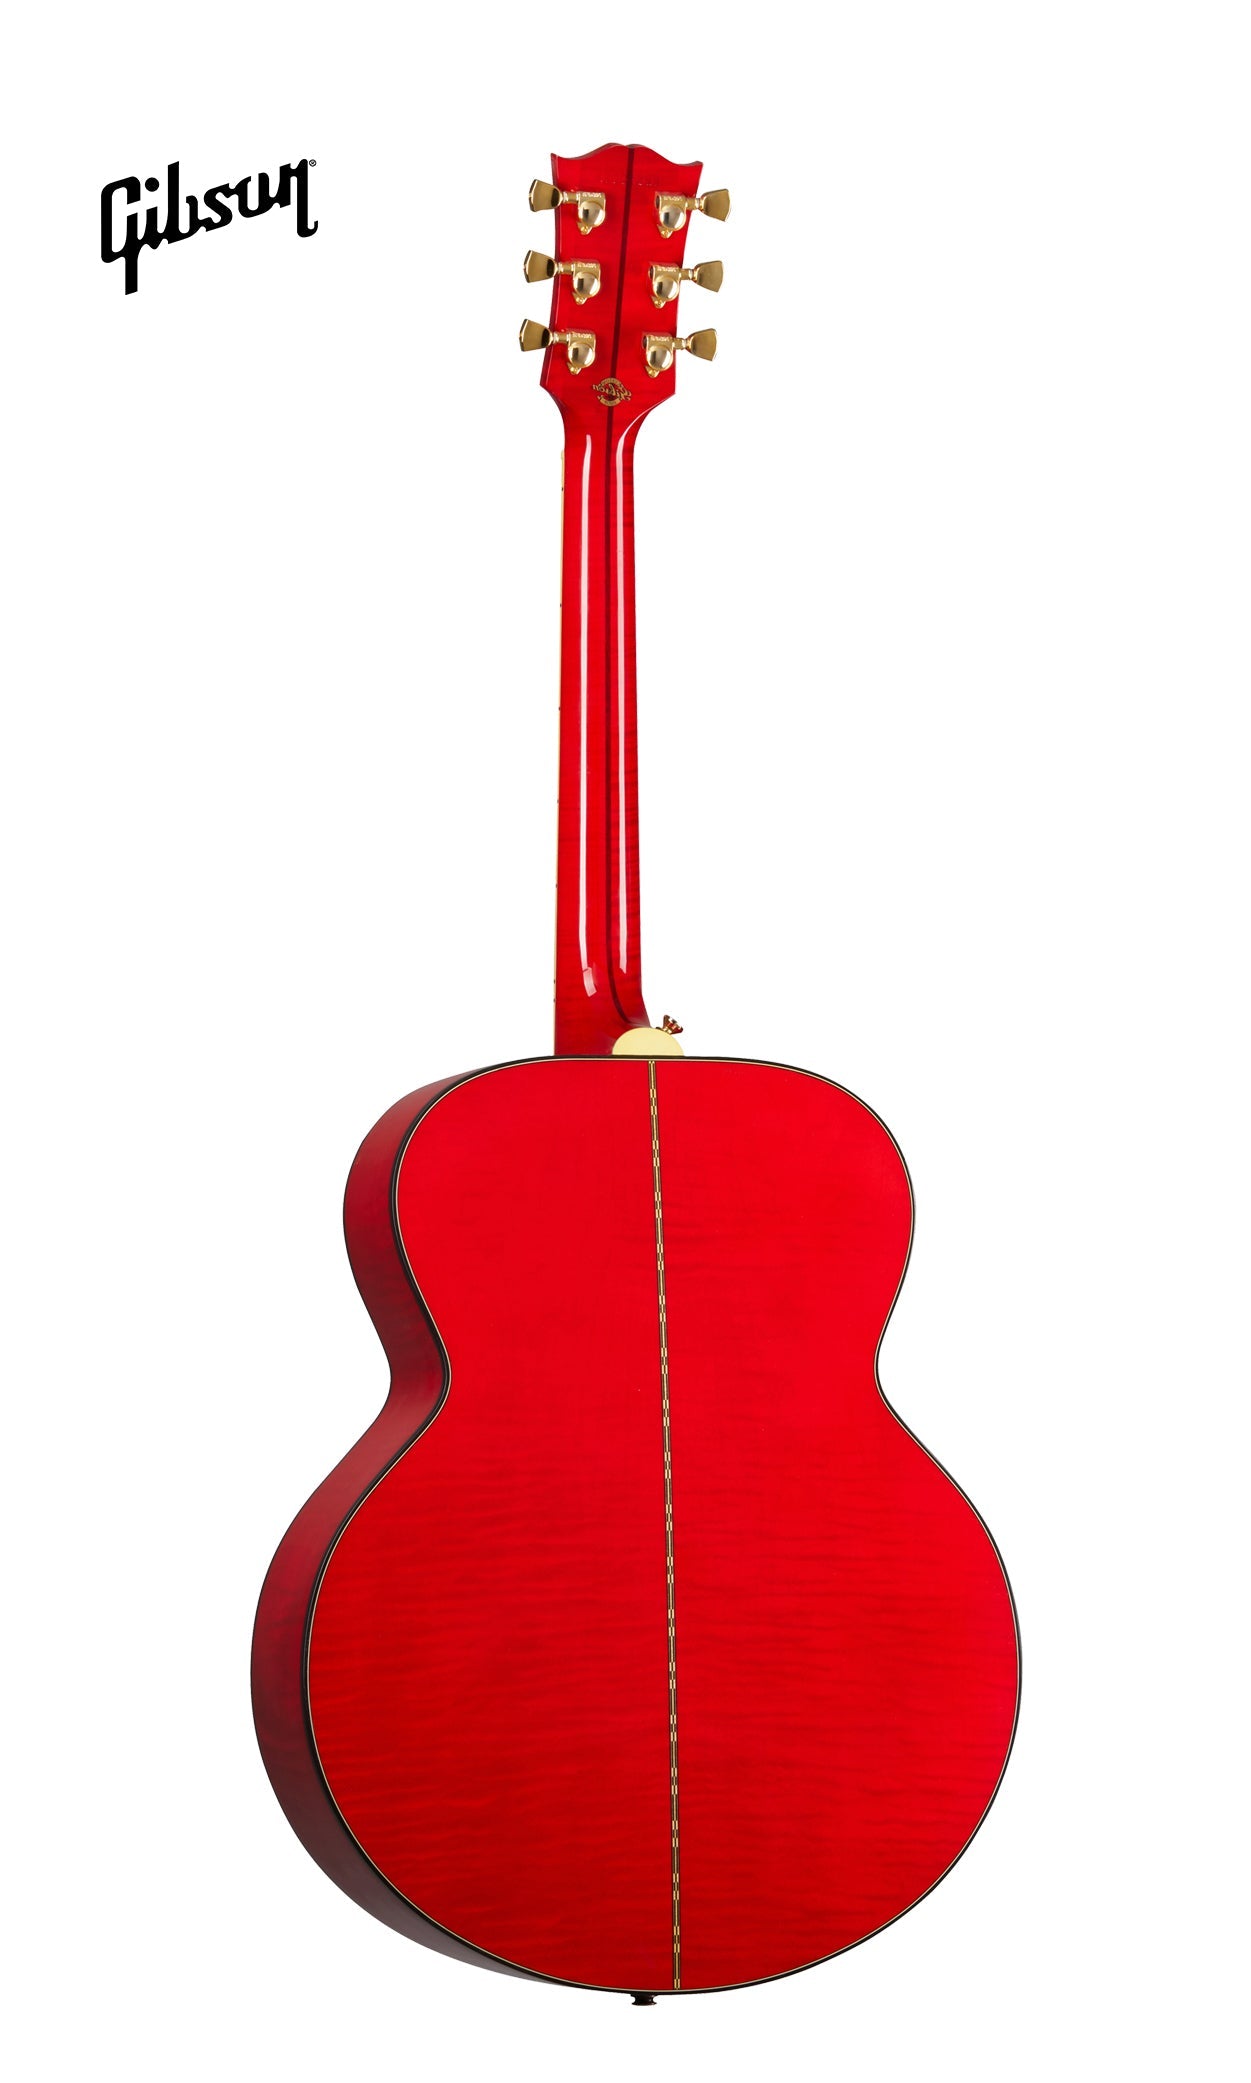 GIBSON ORIANTHI SJ-200 LEFT-HANDED ACOUSTIC-ELECTRIC GUITAR - CHERRY